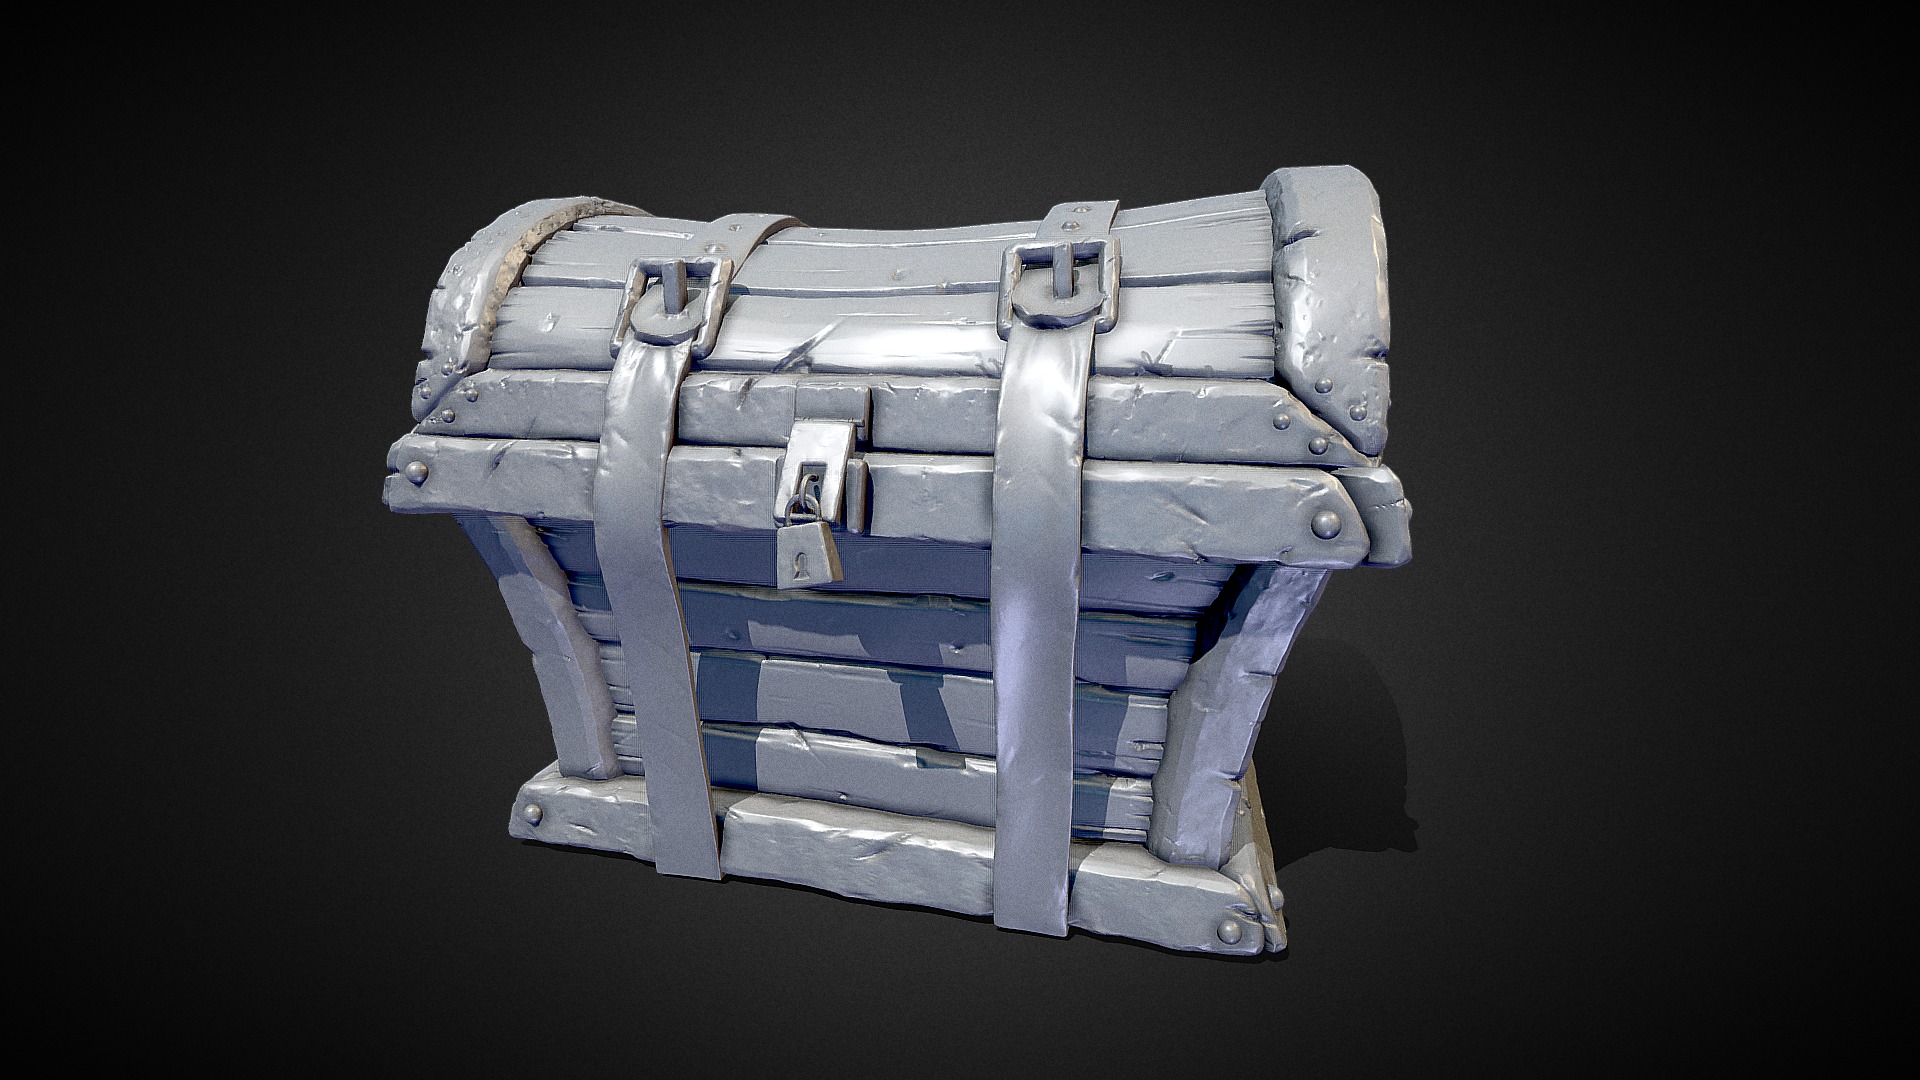 3D model 3D Treasure Chest – High Poly - This is a 3D model of the 3D Treasure Chest - High Poly. The 3D model is about a blue and silver metal box.